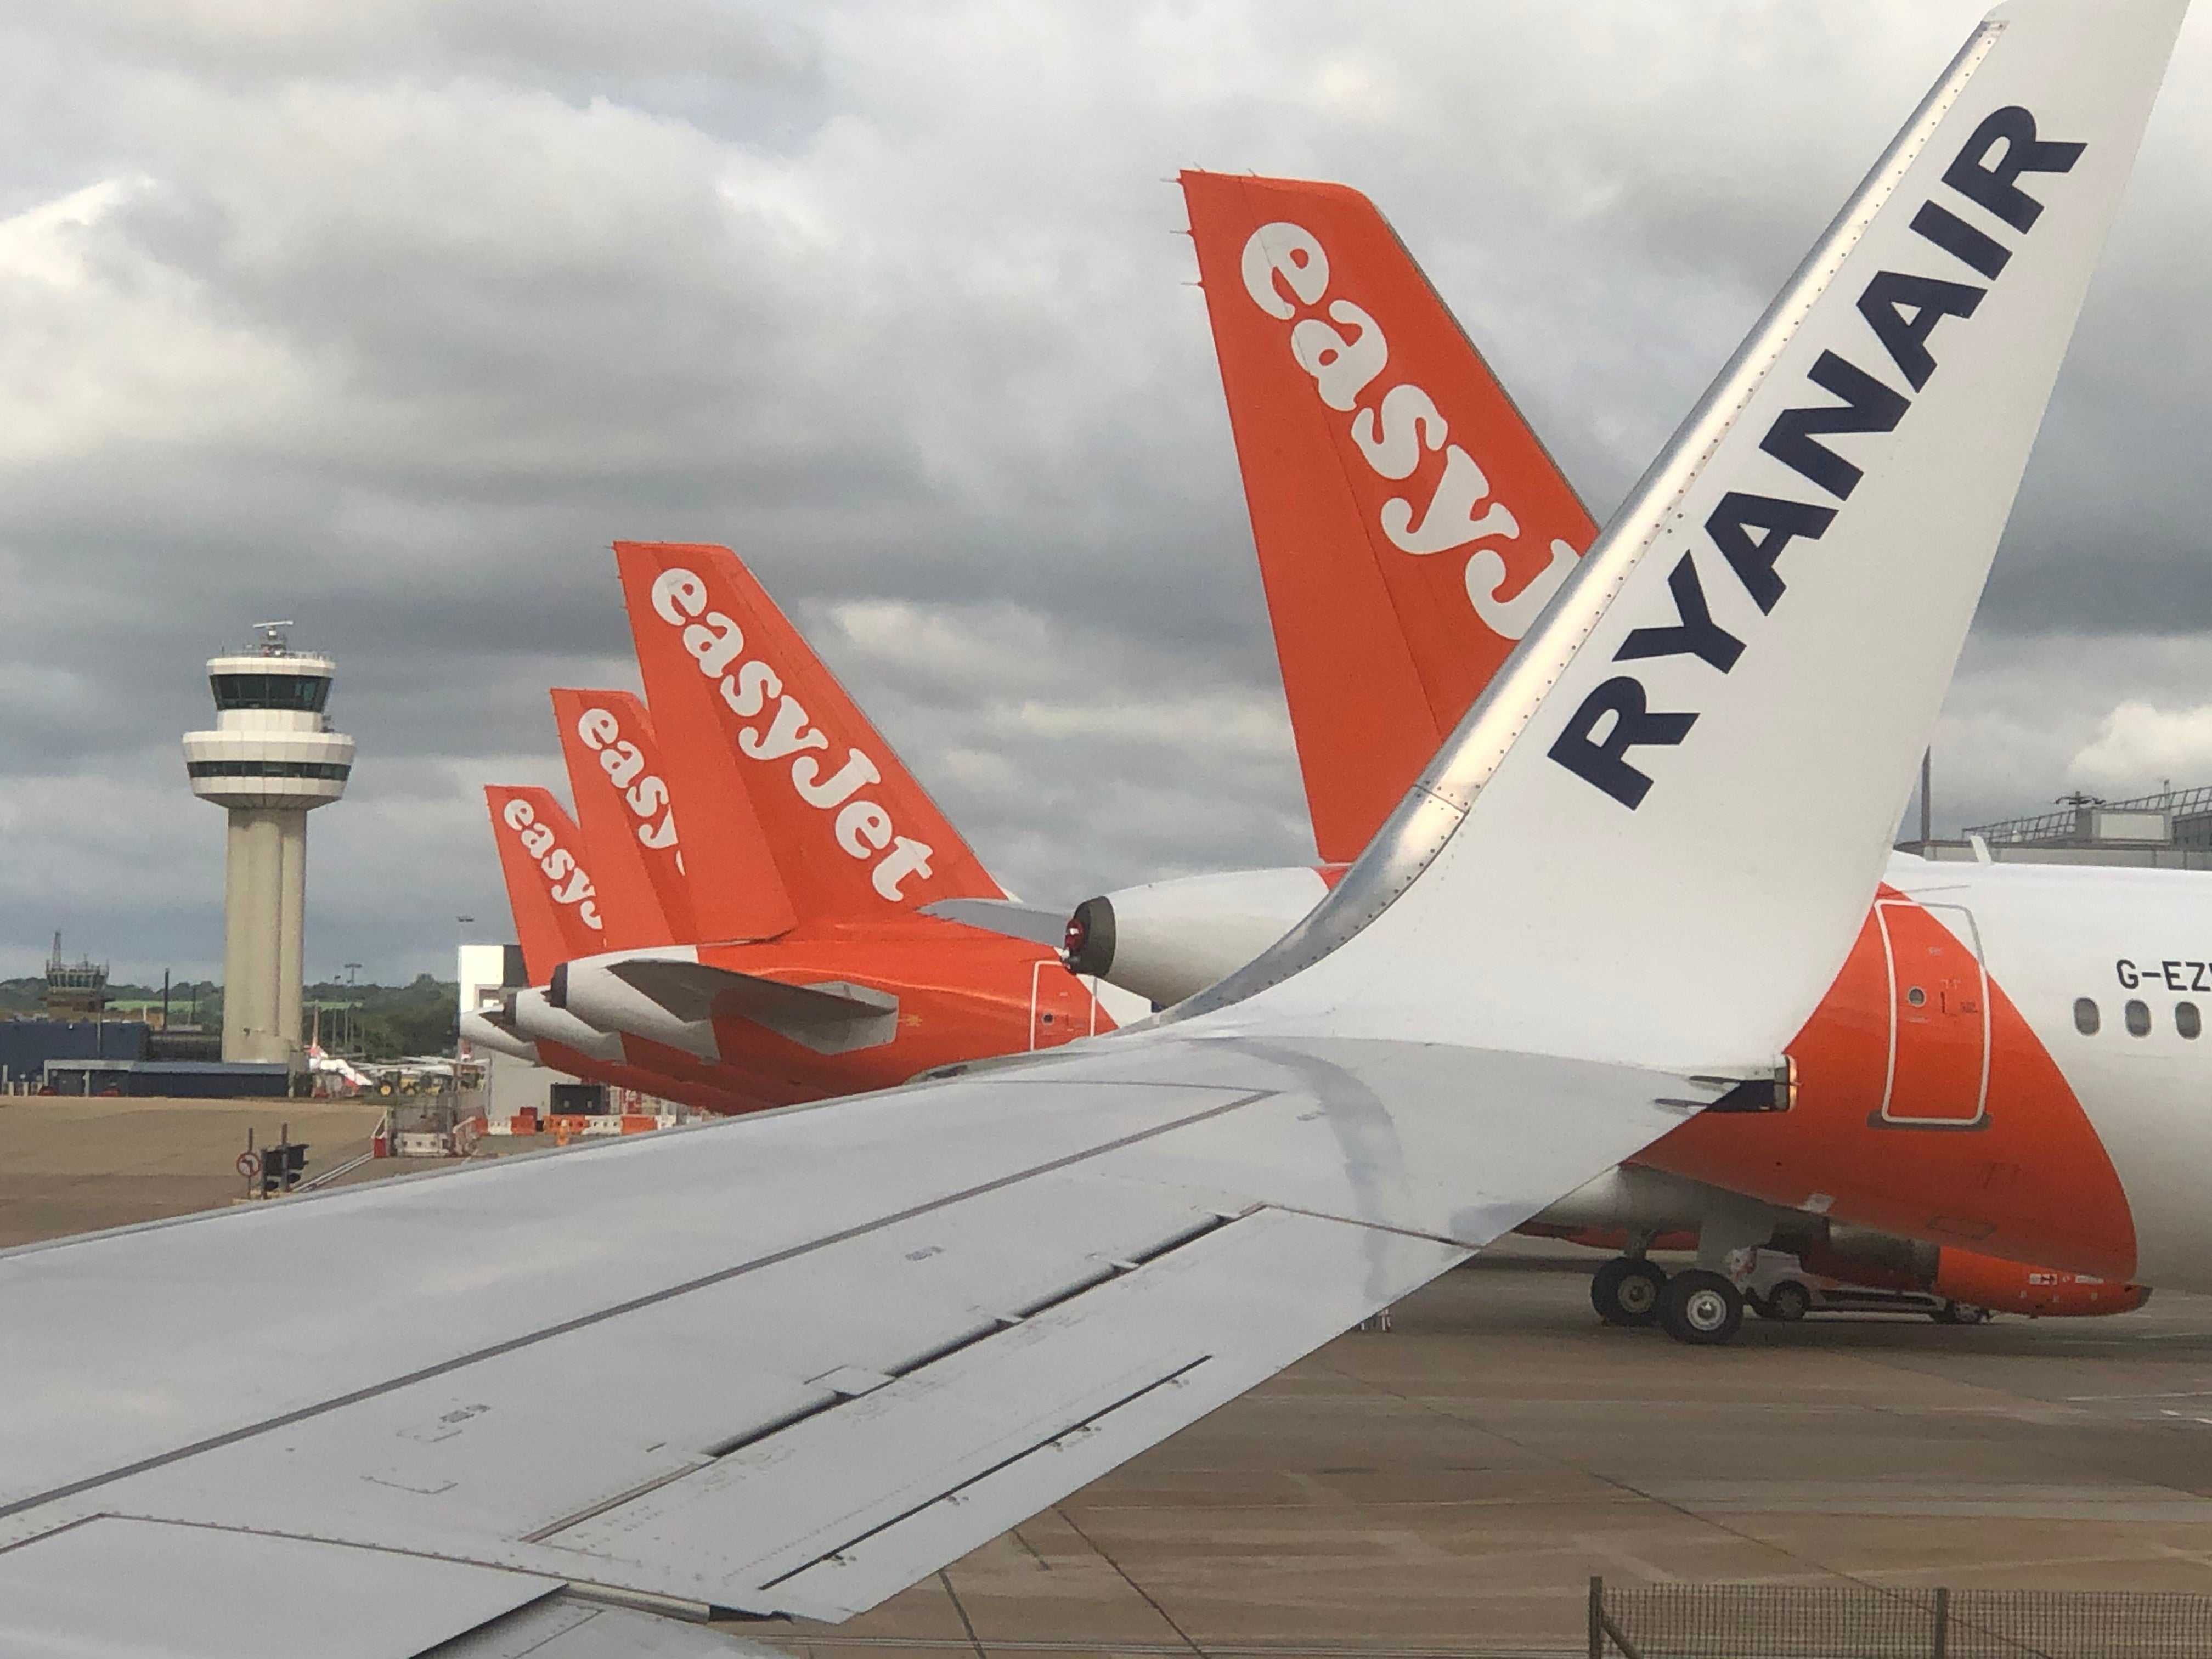 Safe bets: the view from a Ryanair plane of easyJet tailfins at Gatwick airport